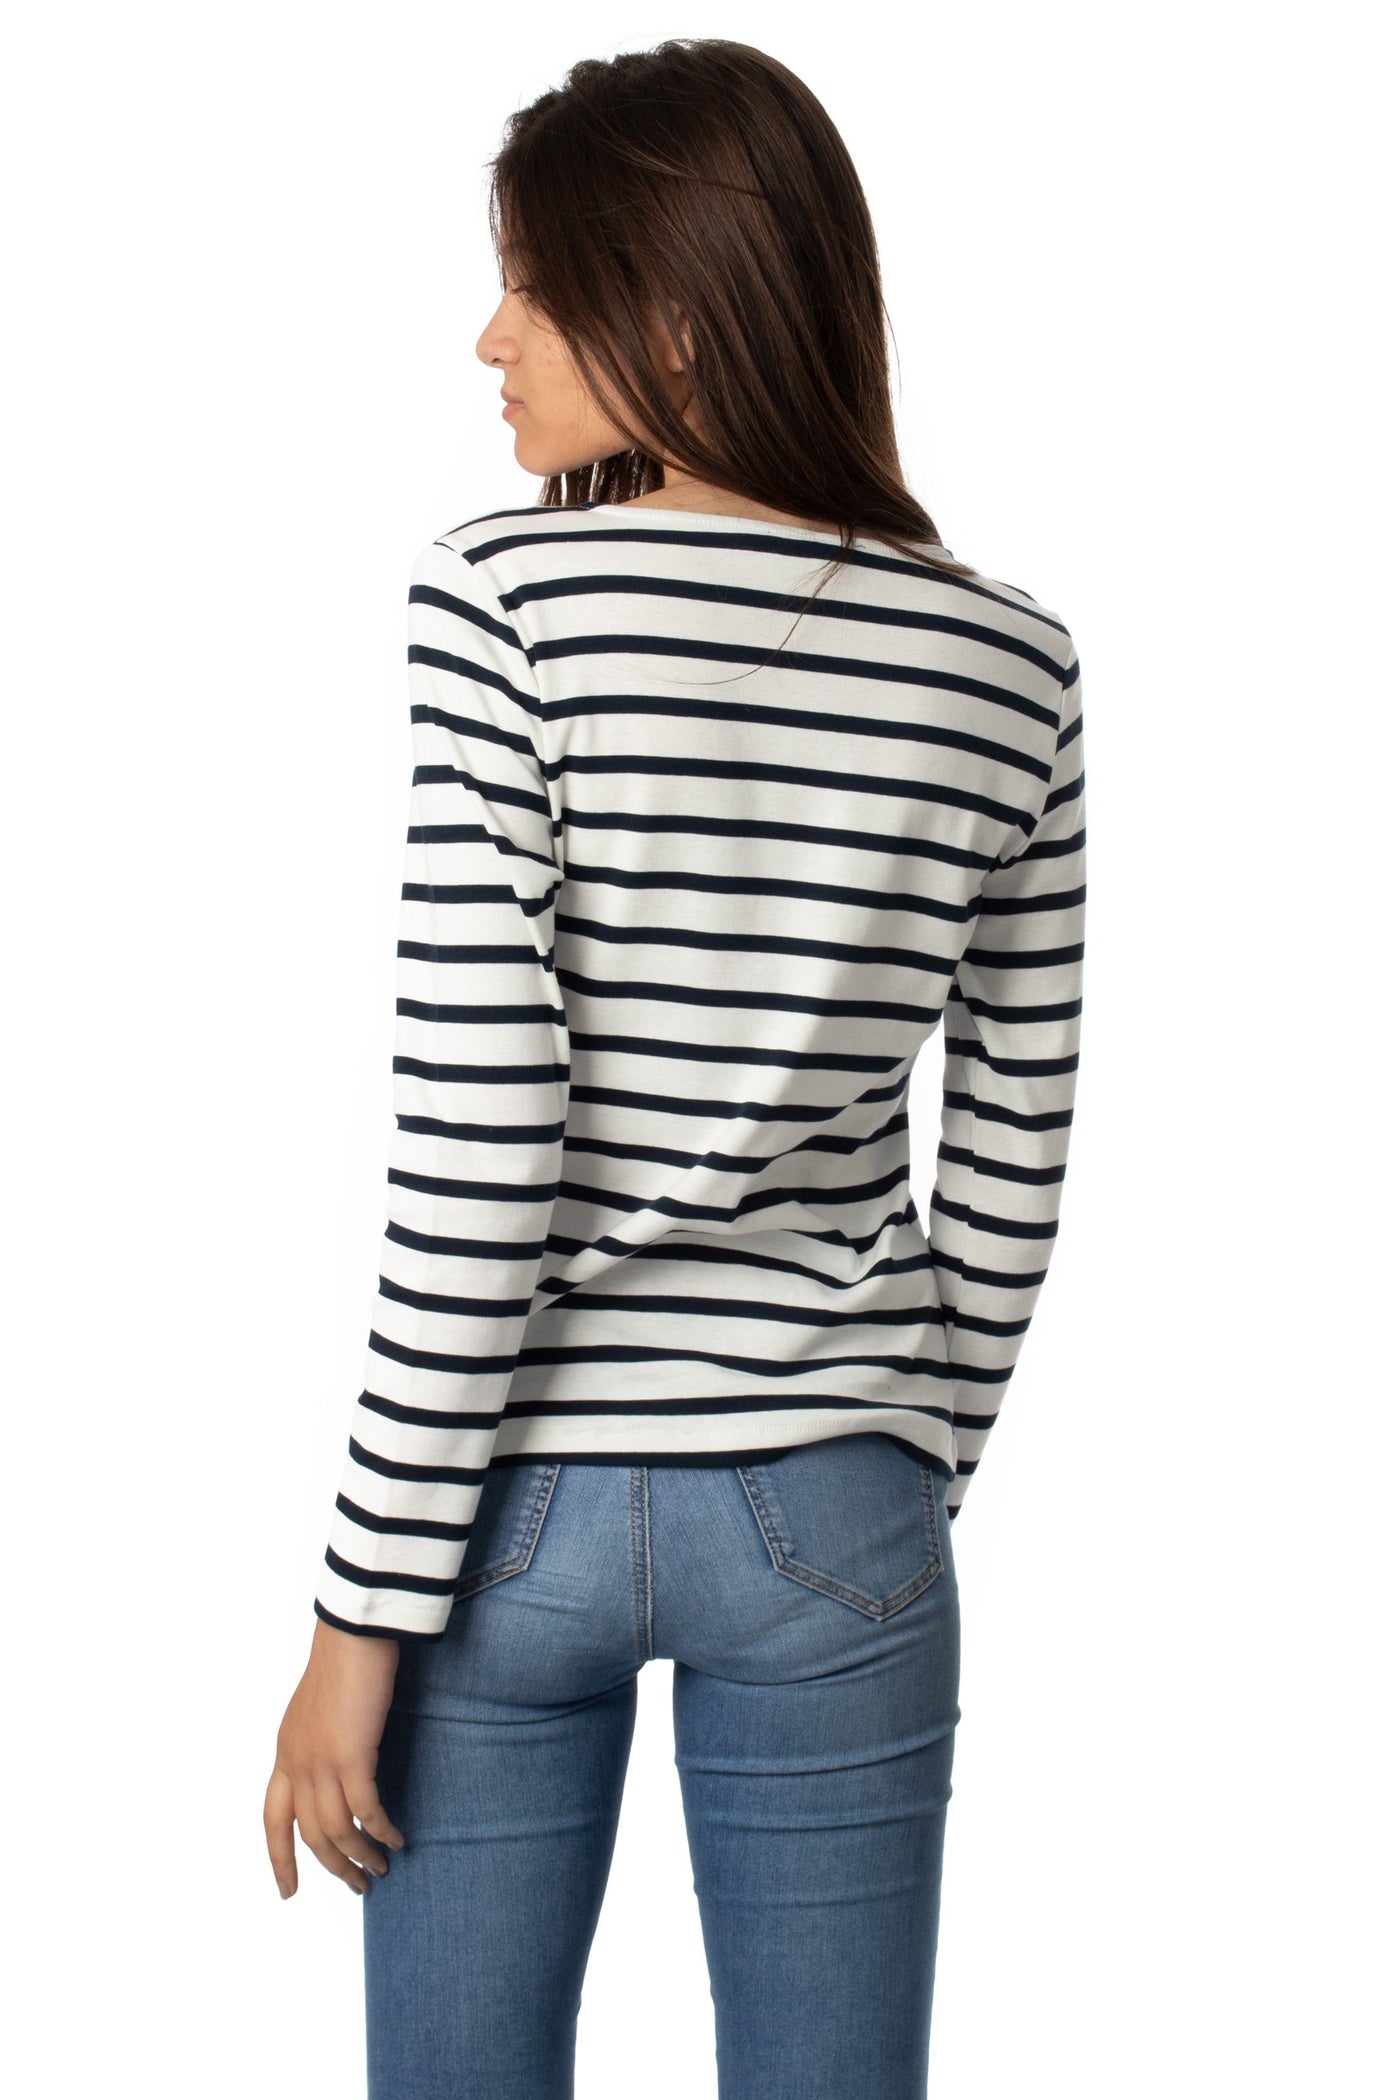 chassca boat neck striped  t-shirt with love print - Breakmood